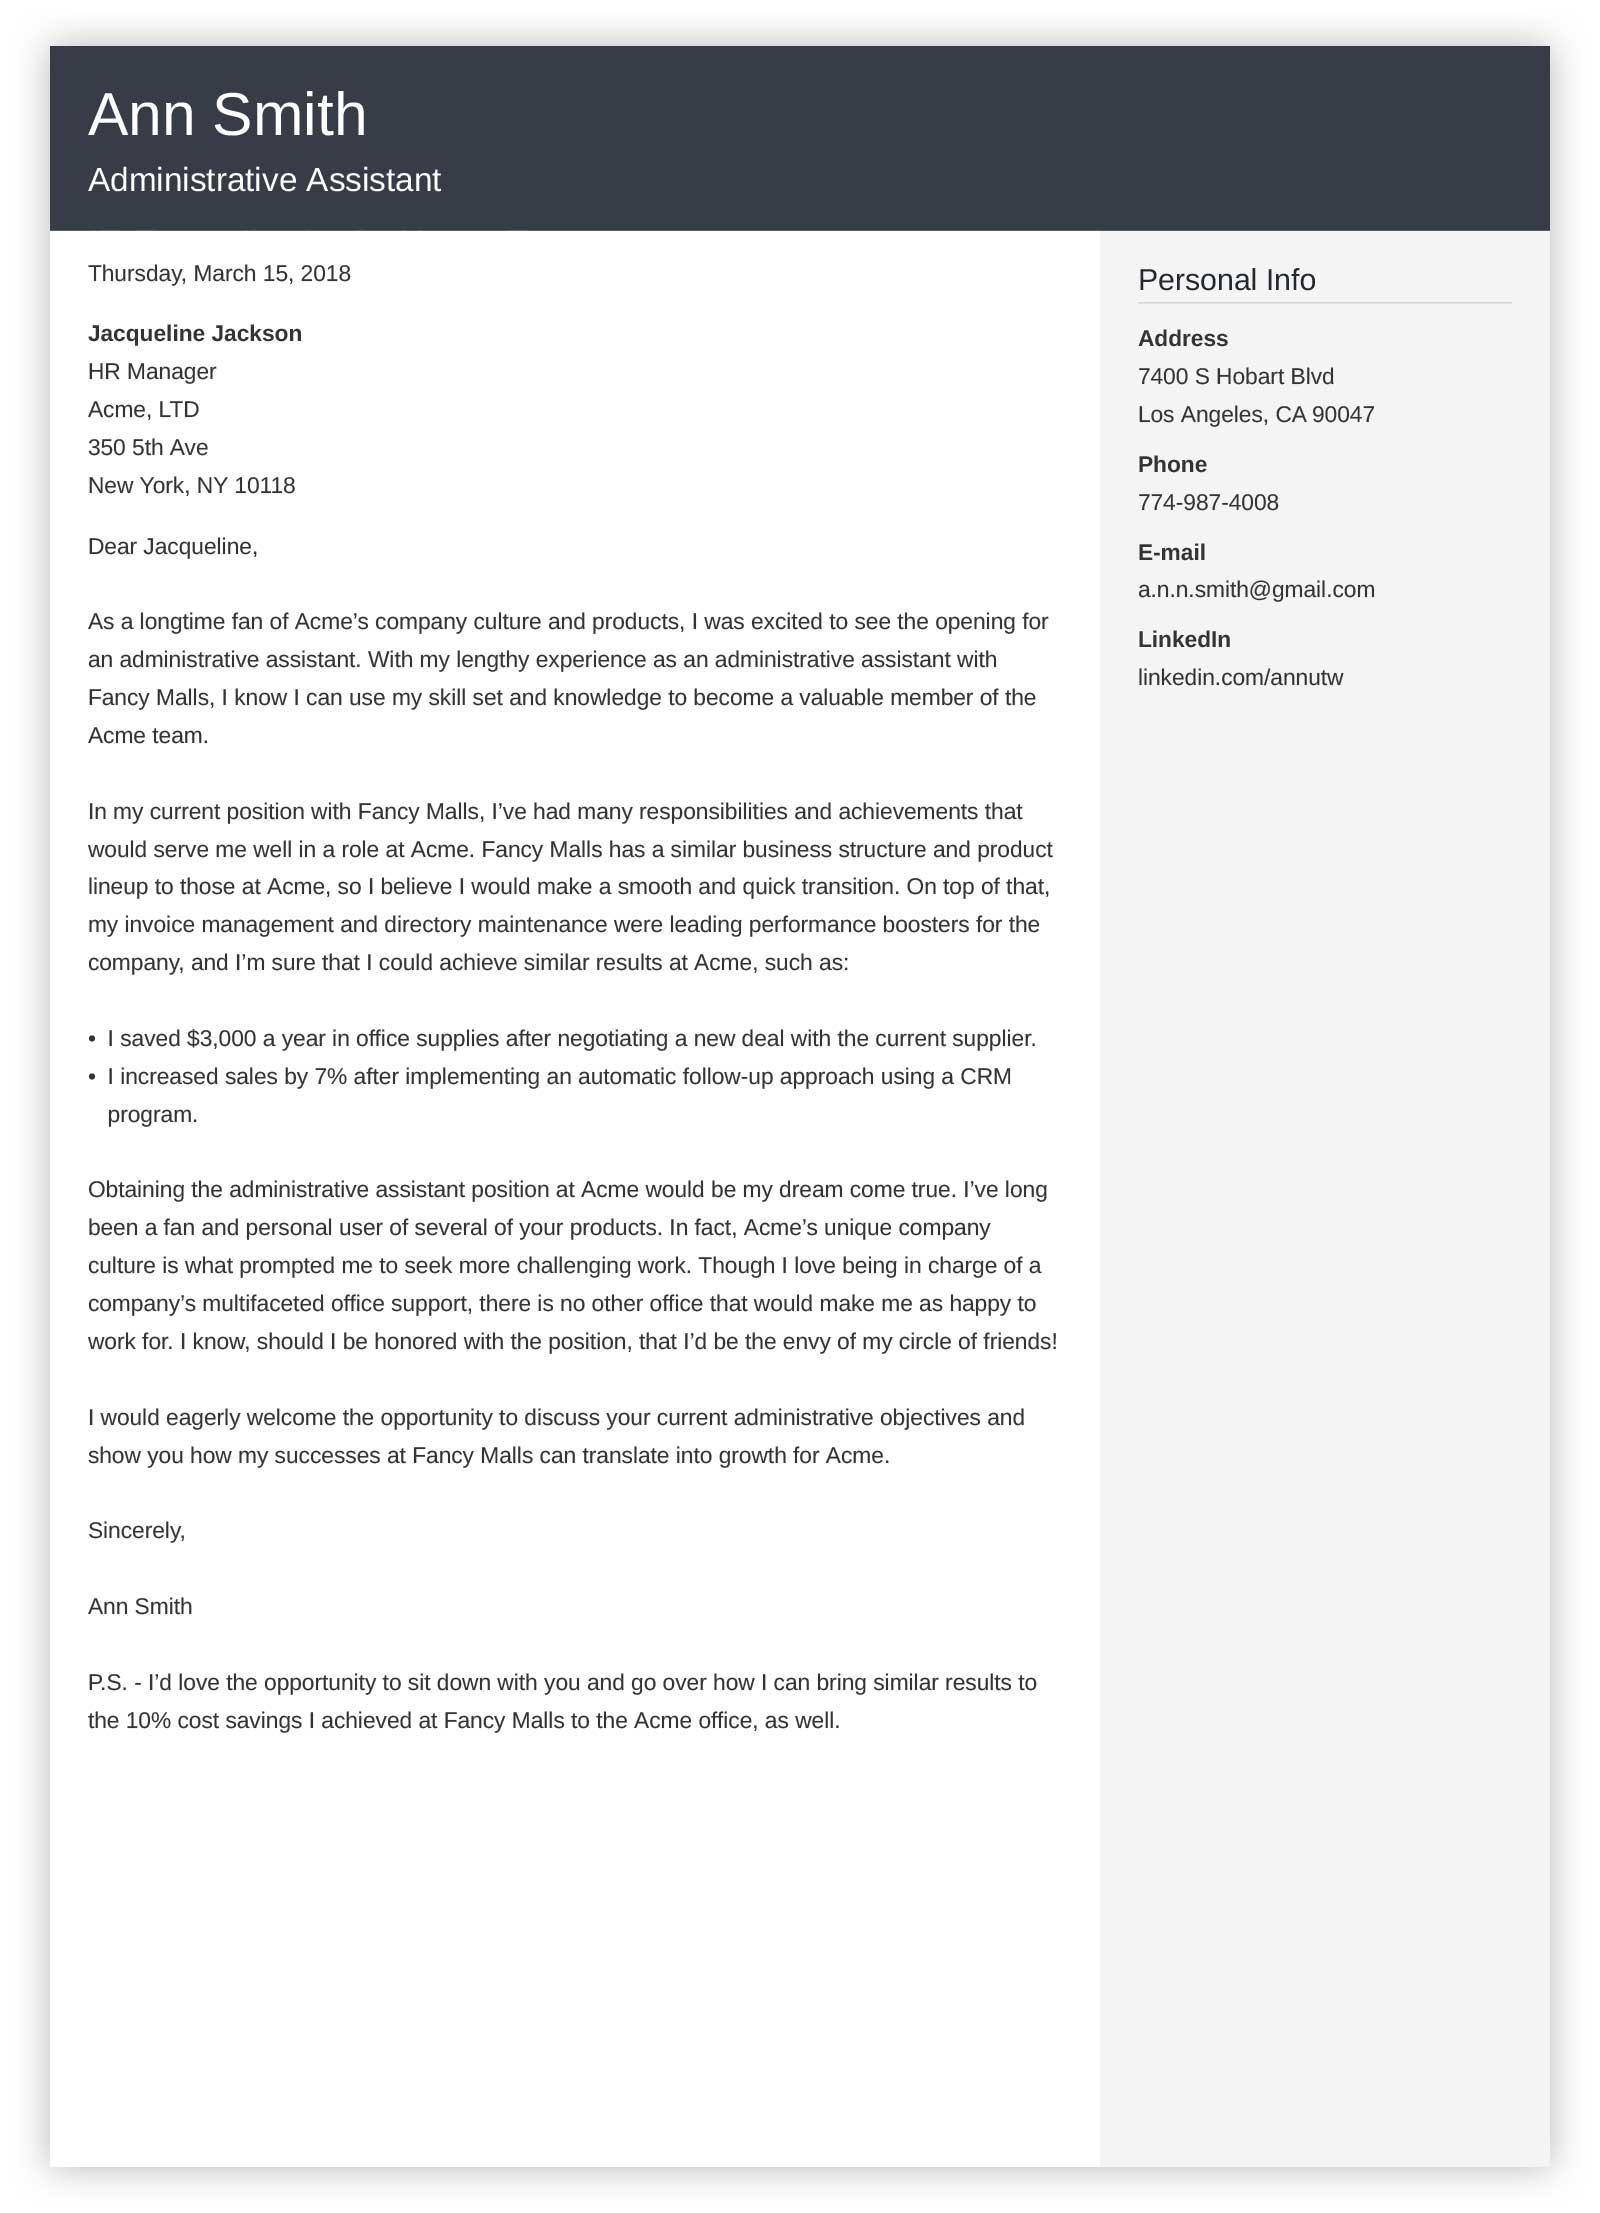 Administrative Assistant Cover Letter Sample & 24+ Tips